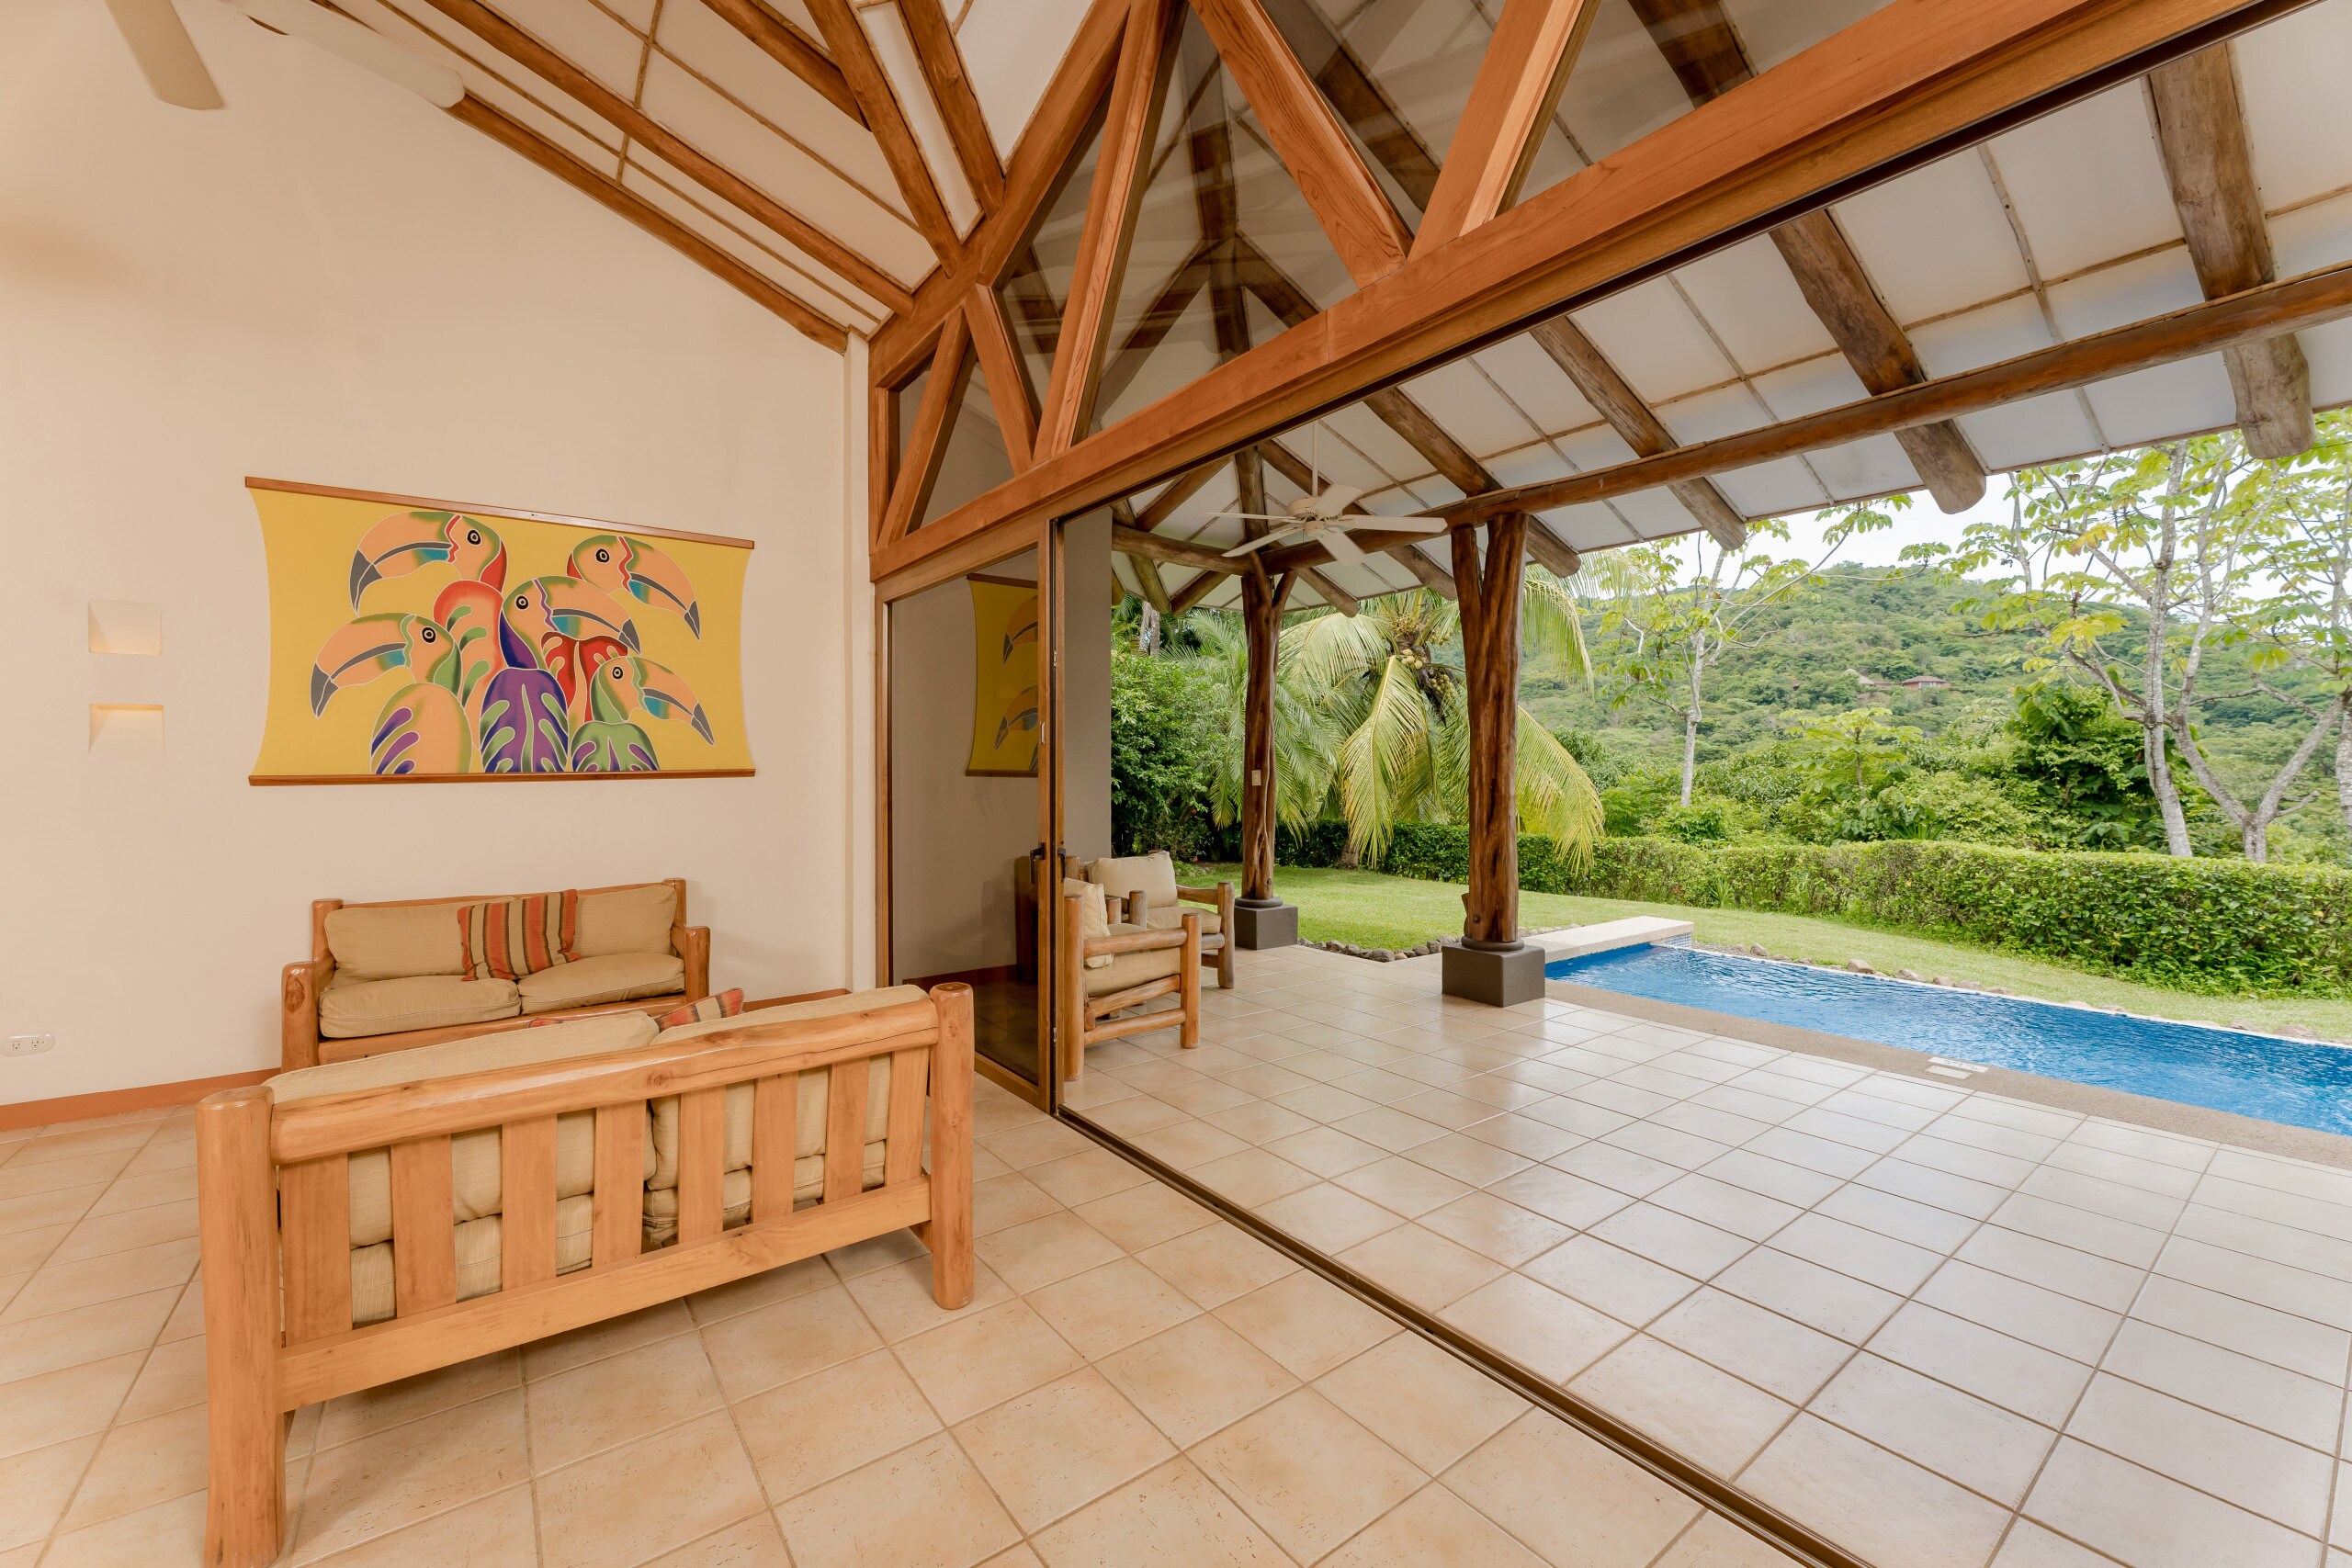 Property Image 2 - Tamarindo, charming, private, and rustic-style 3 bedroom villa